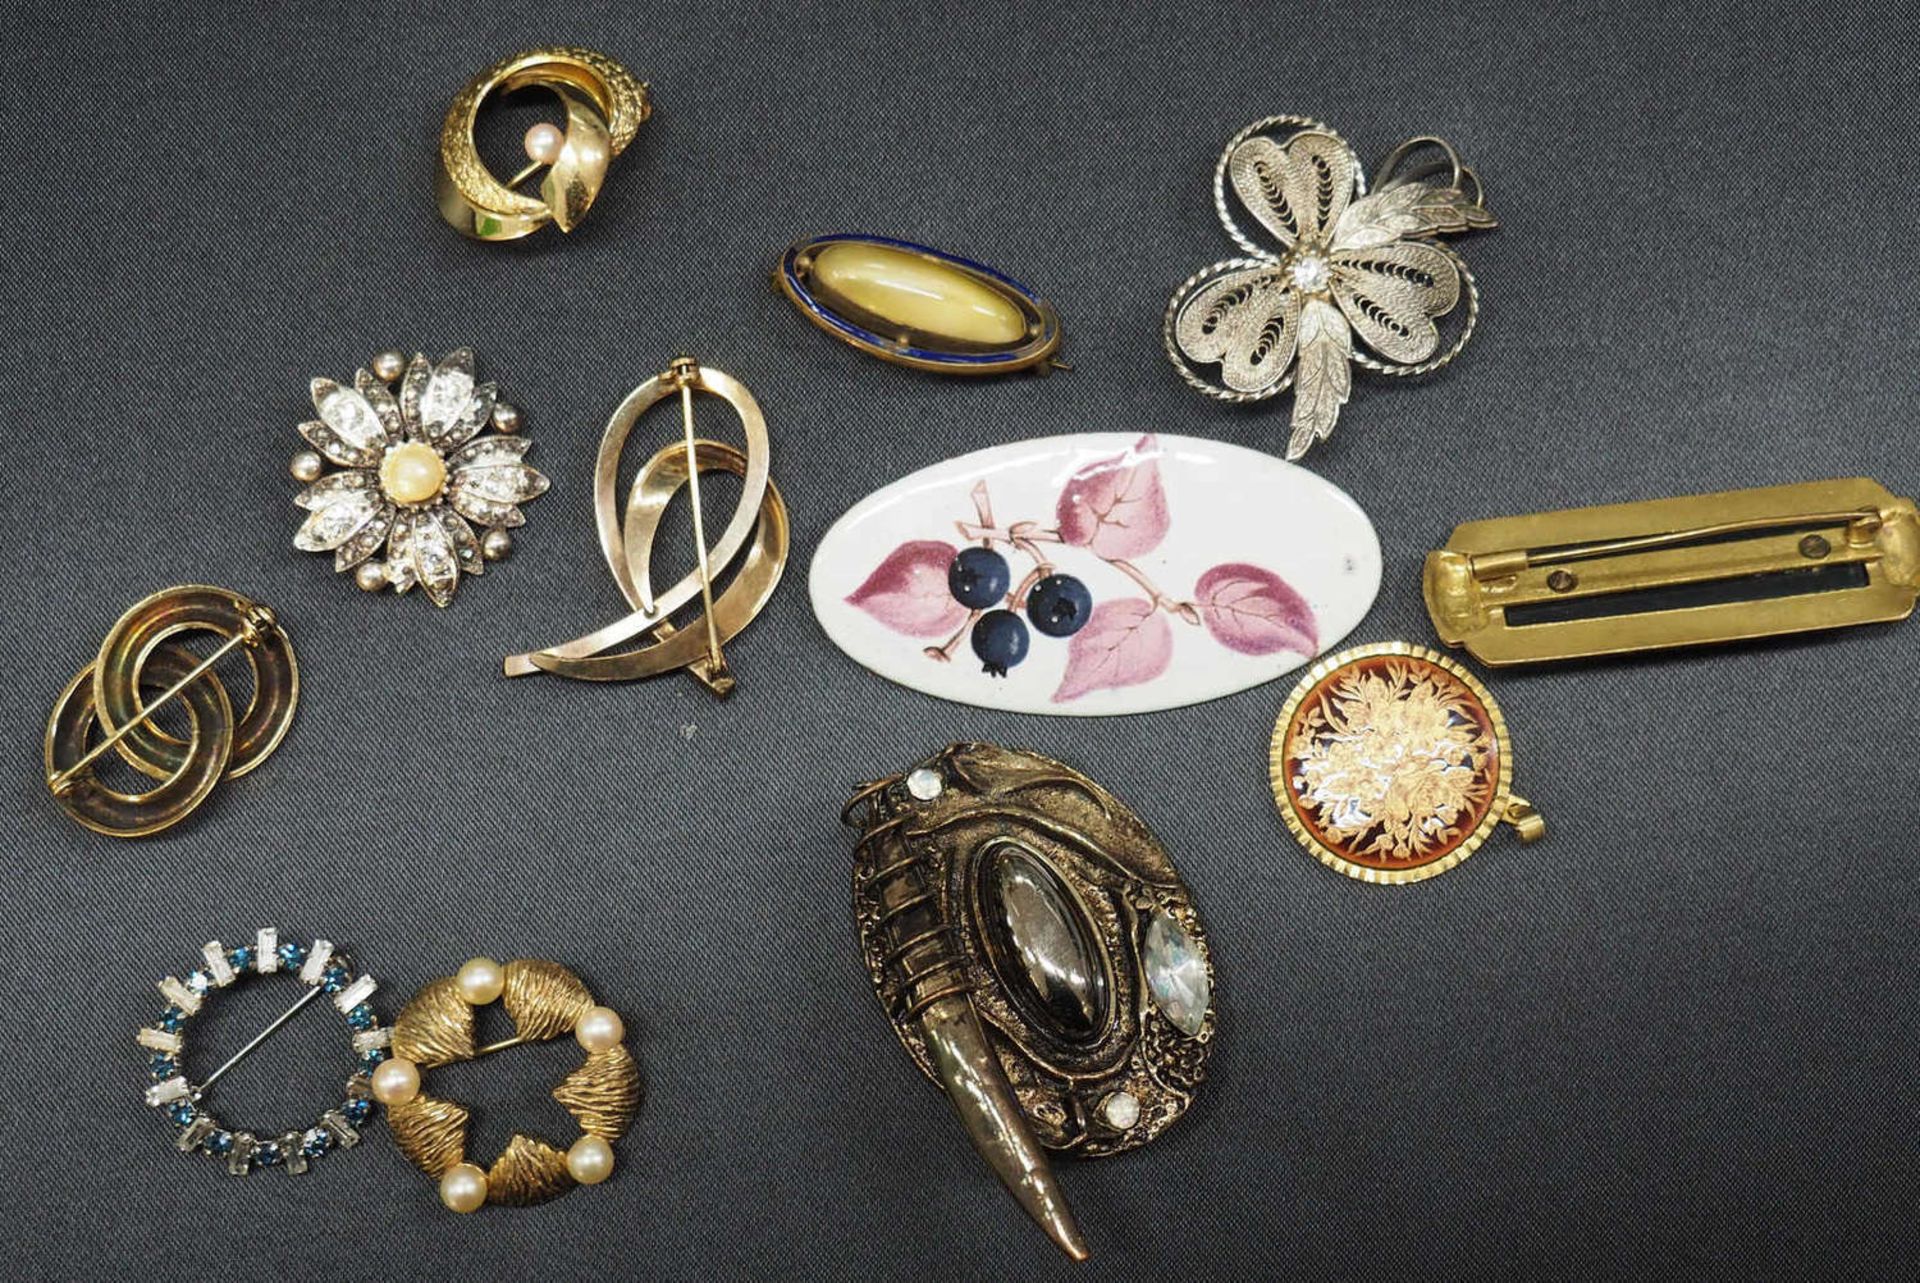 Lot of old brooches, base metals. Please visit.